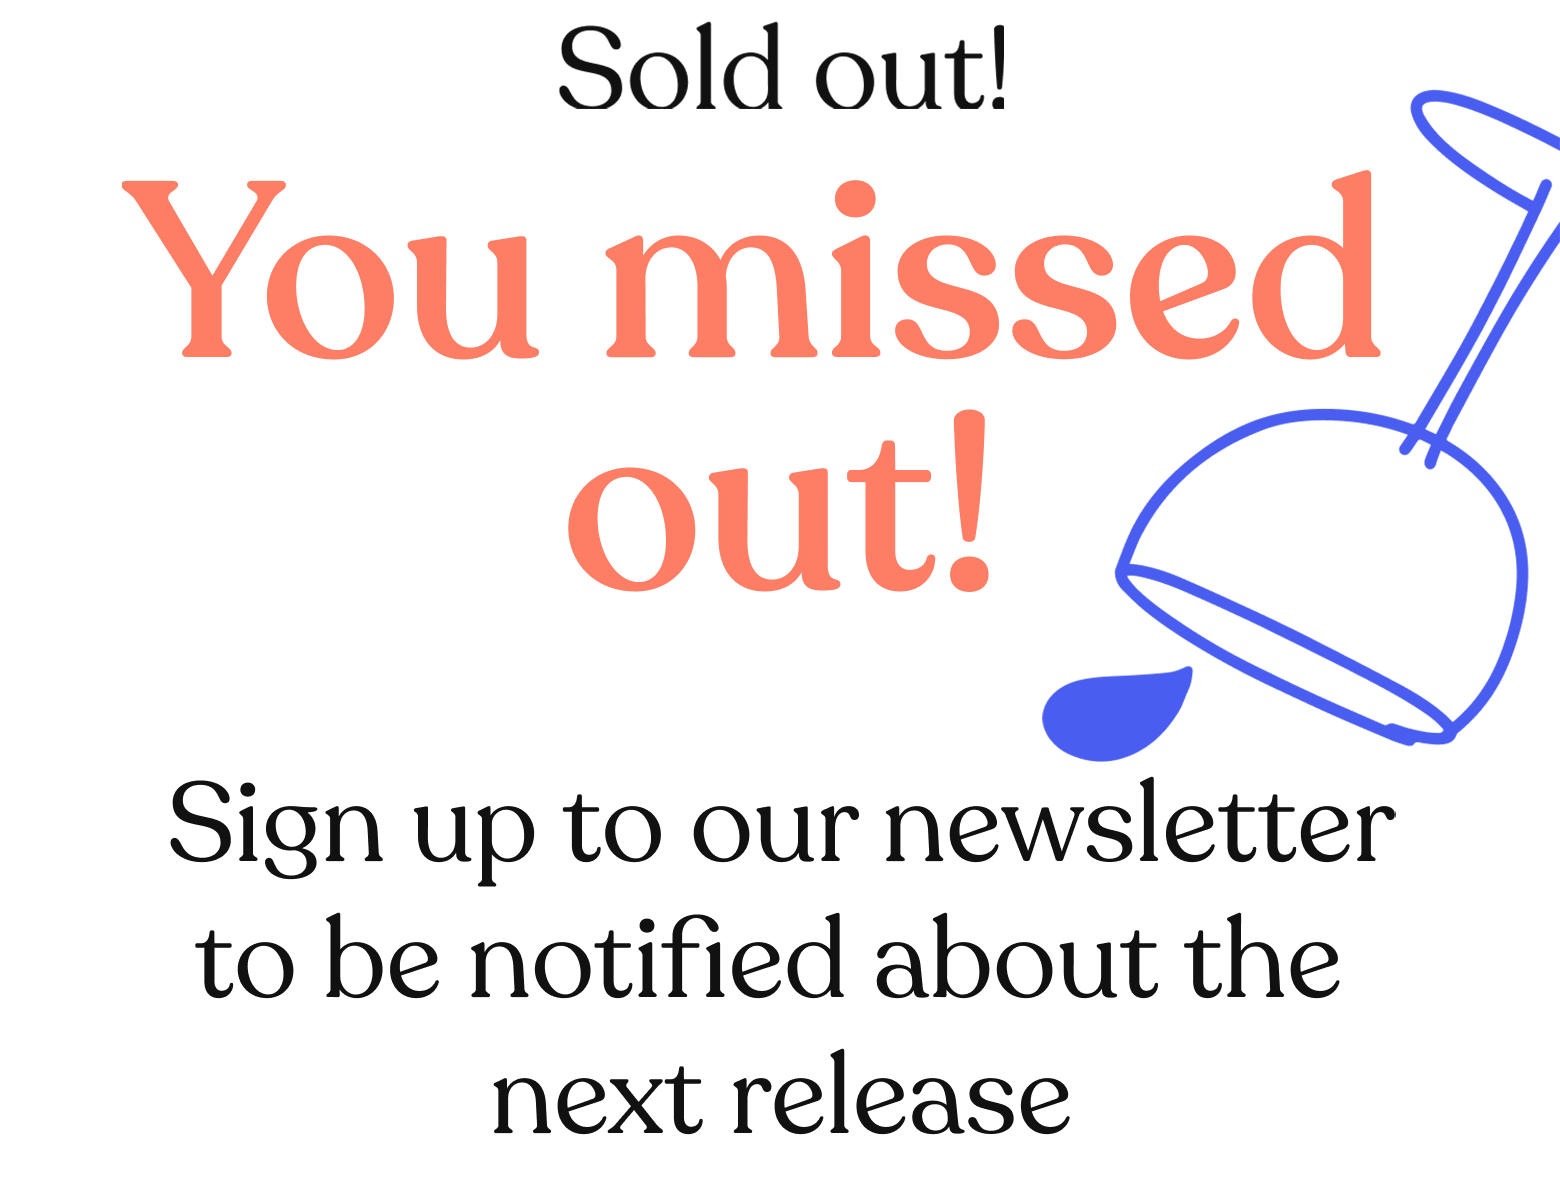 Sold Out! You missed out! Sign up to our newsletter to be notified about the next release